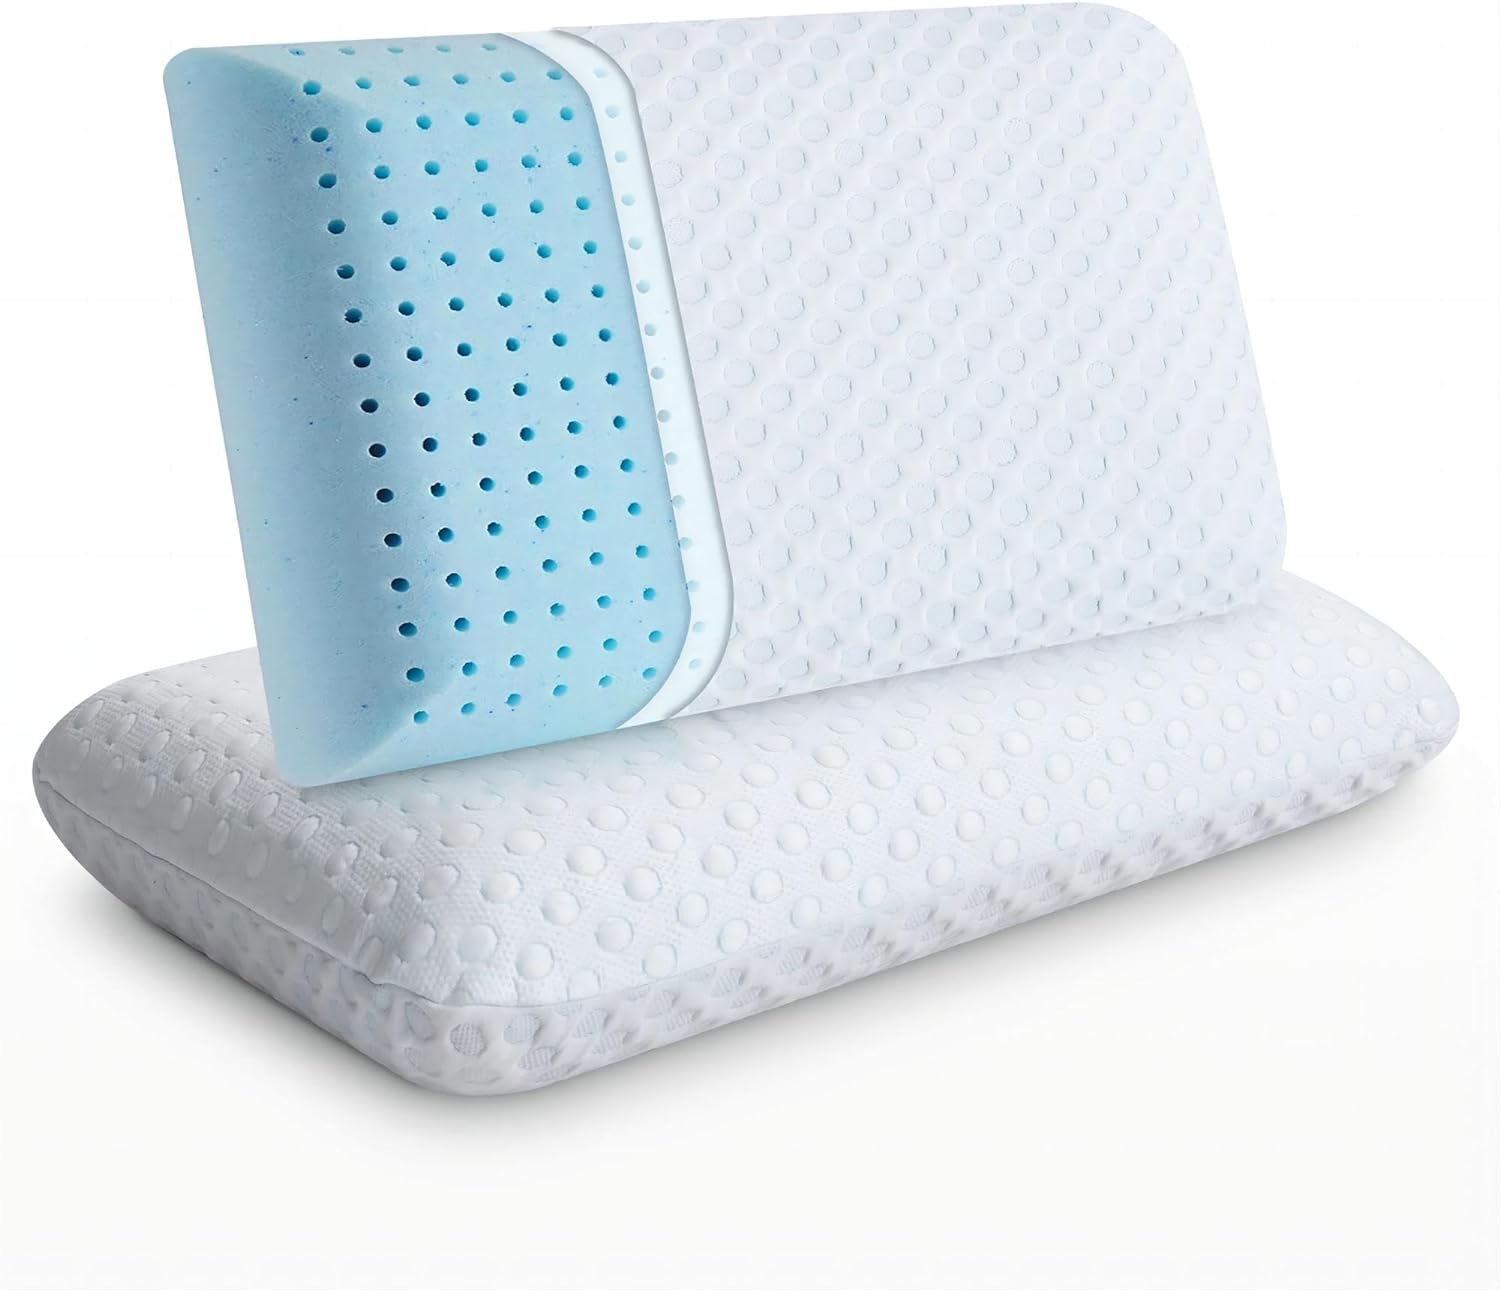 I bought these for my mom cuz she needed pillows these came very fast and we were surprised that they were vacuumed sealed and look little little thin pillow but to our great surprised they grew to an actual big size and the covers come off of them for easy washing and they are so comfortable